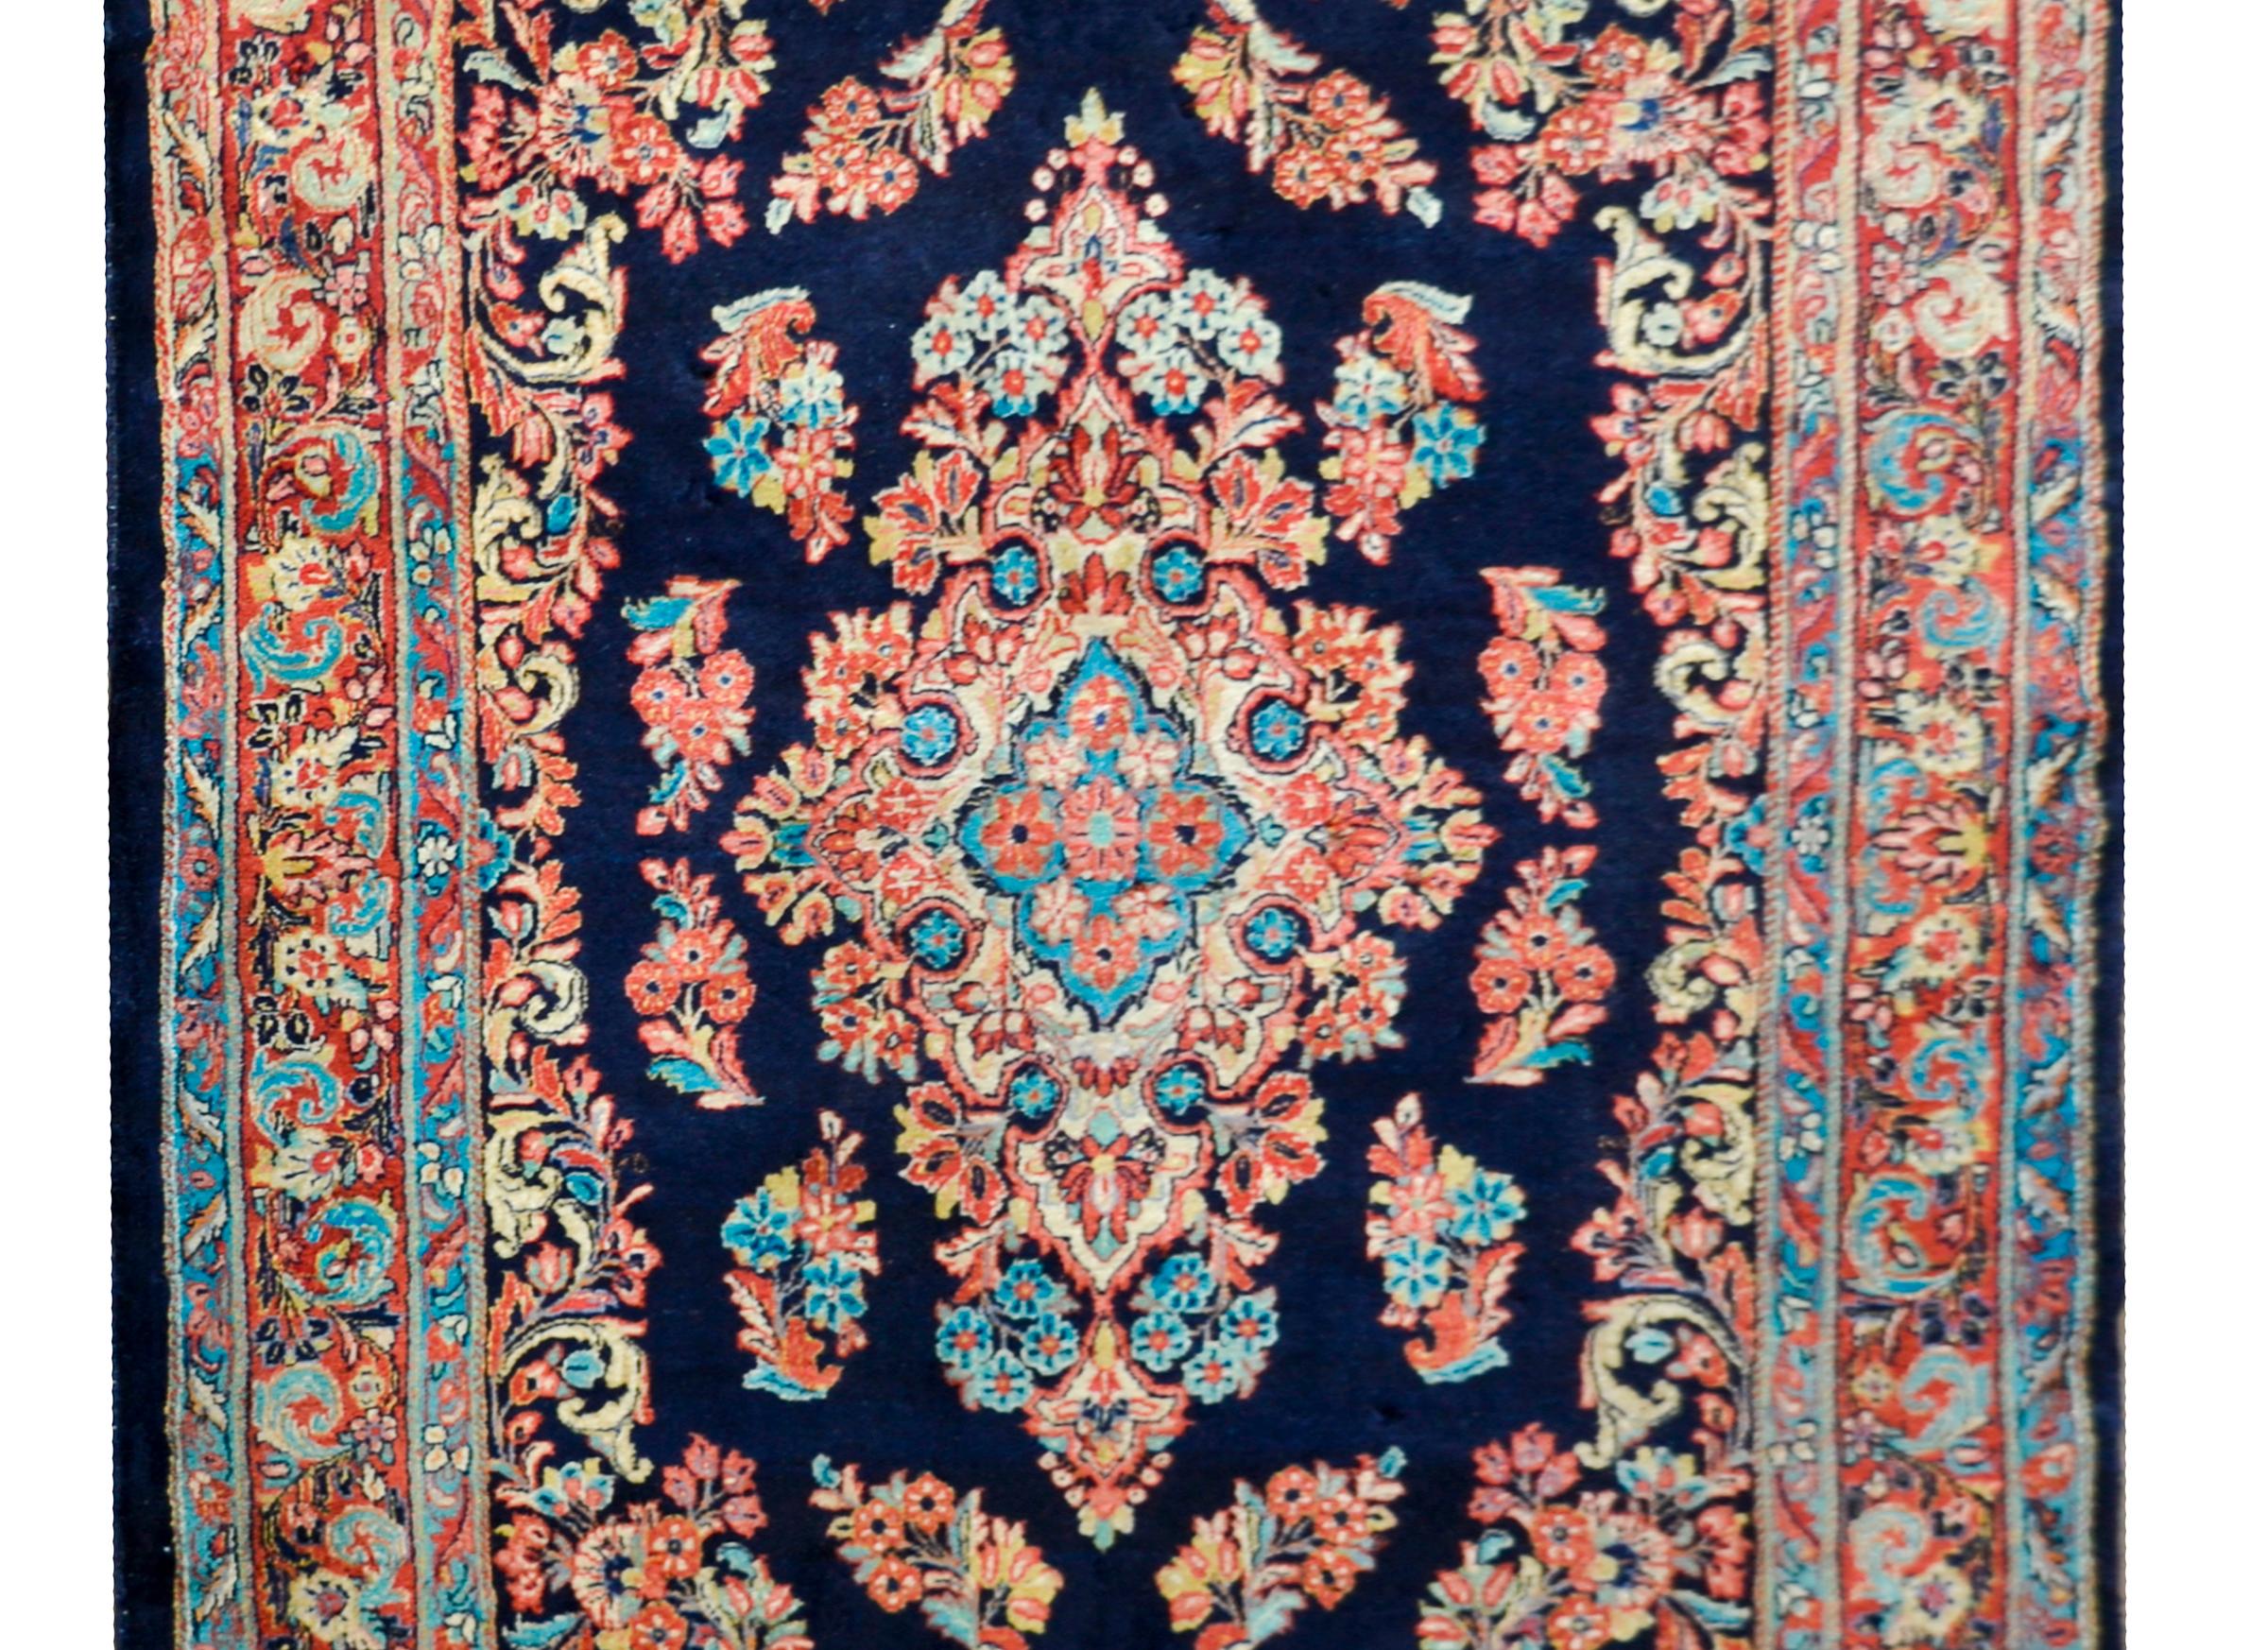 A wonderful early 20th century Persian Sarouk rug with a central floral medallion surrounded by a border woven with similar flowers and the center. The border is complementary with similar flowers and colors as the field.